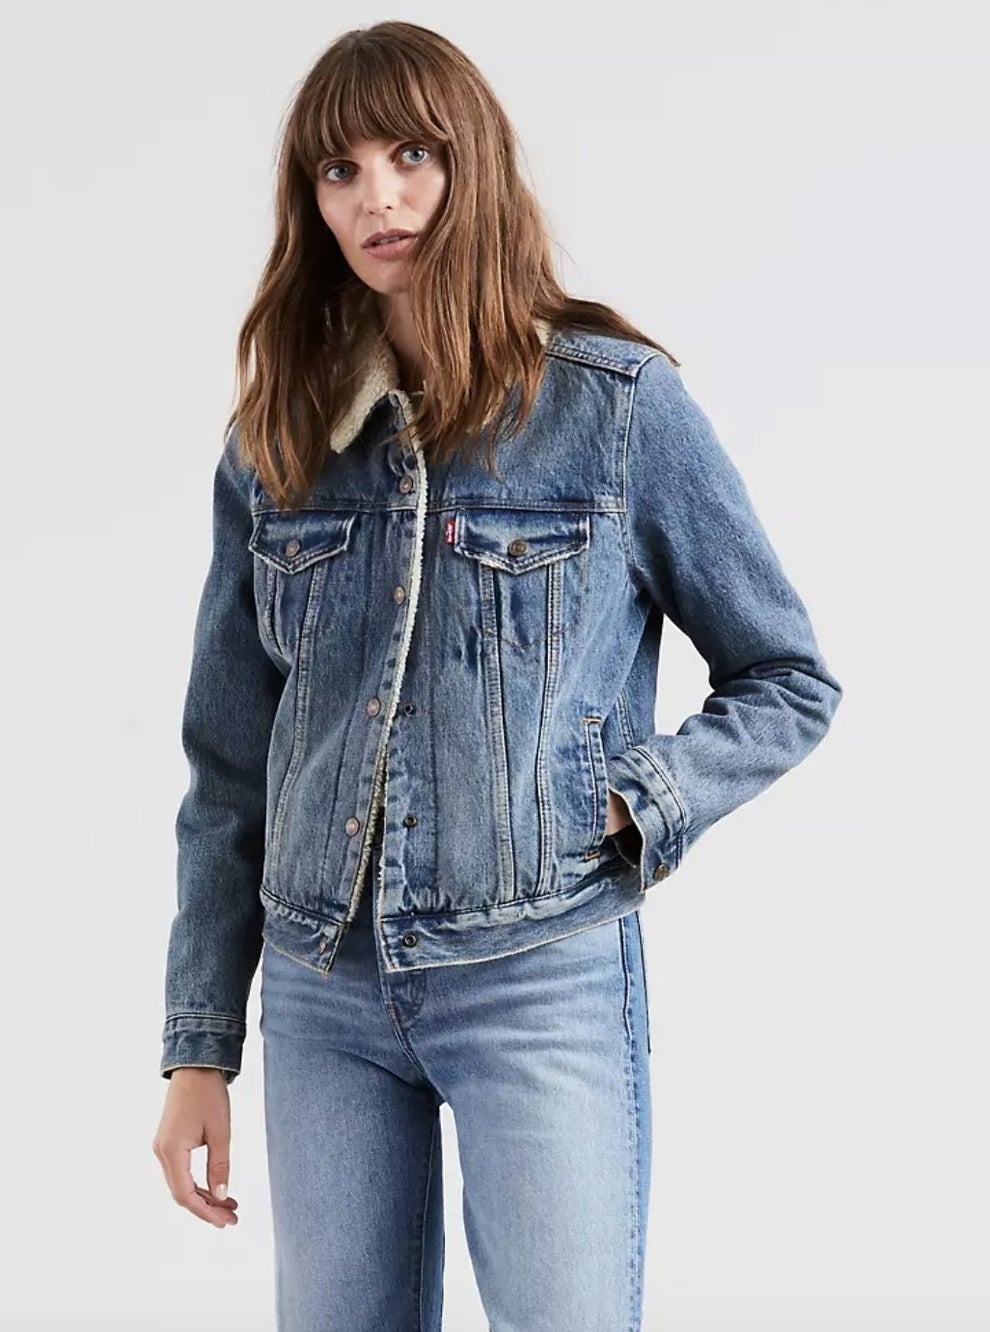 25 Stylish And Comfortable Things From Levi's